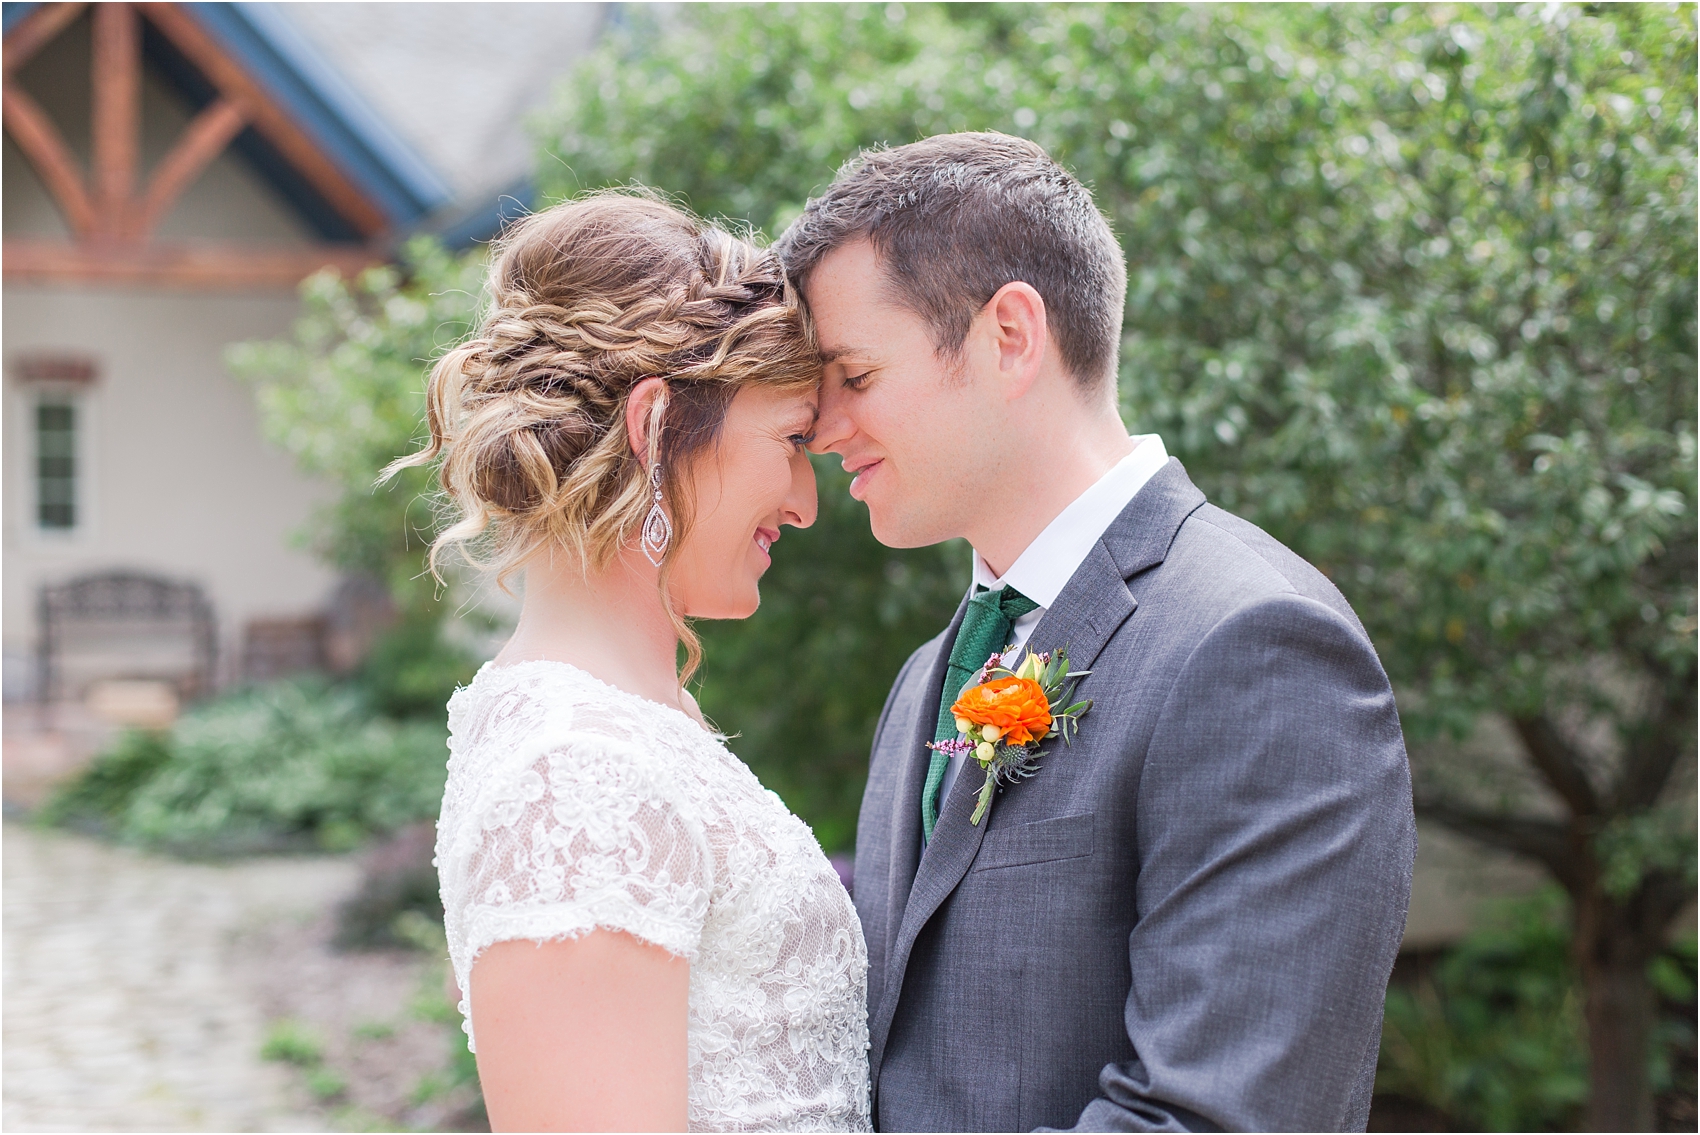 romantic-intimate-backyard-wedding-photos-at-private-estate-in-ann-arbor-mi-by-courtney-carolyn-photography_0077.jpg